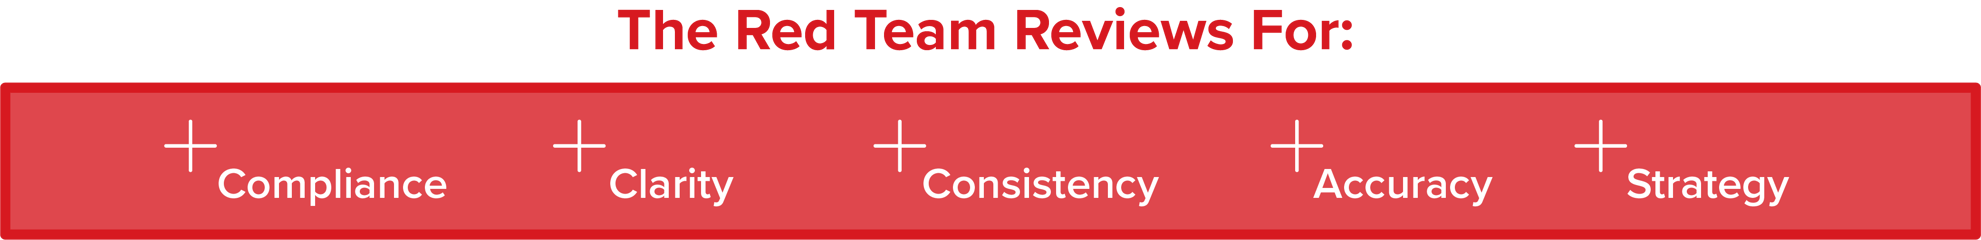 Red Team Reviews For